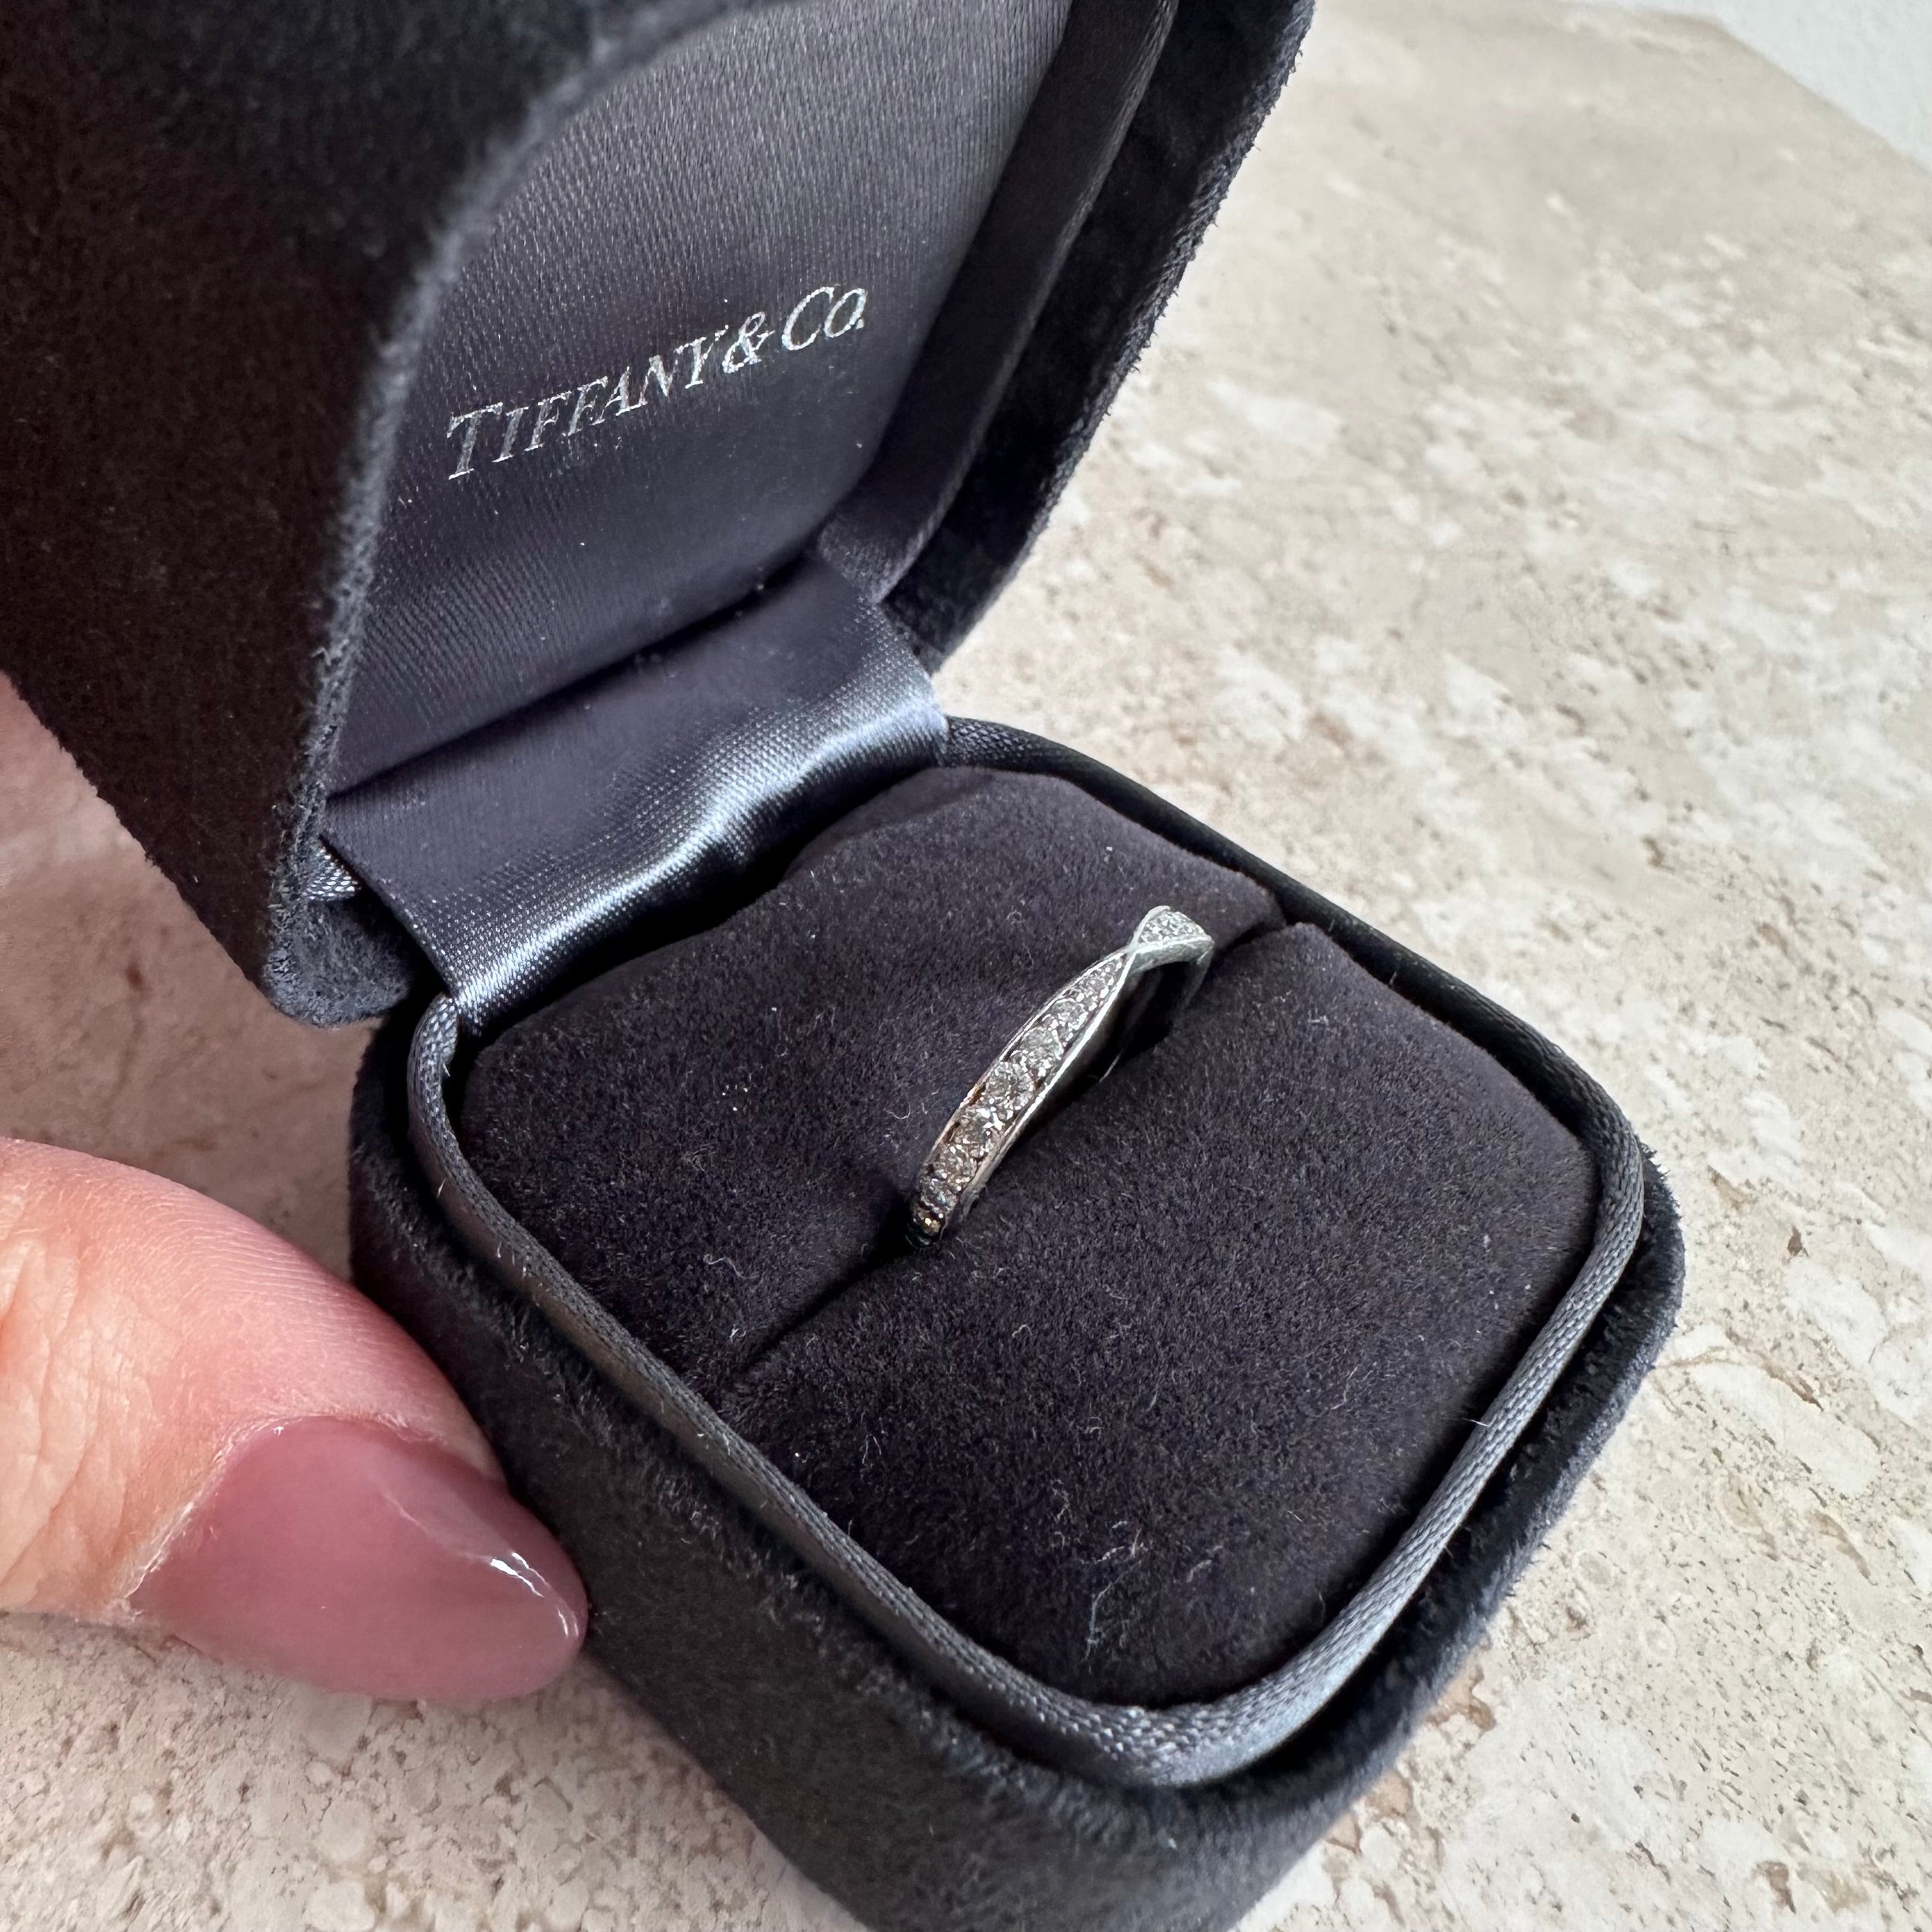 Pre-Owned TIFFANY & Co. Harmony Band Ring with Diamonds Size 5